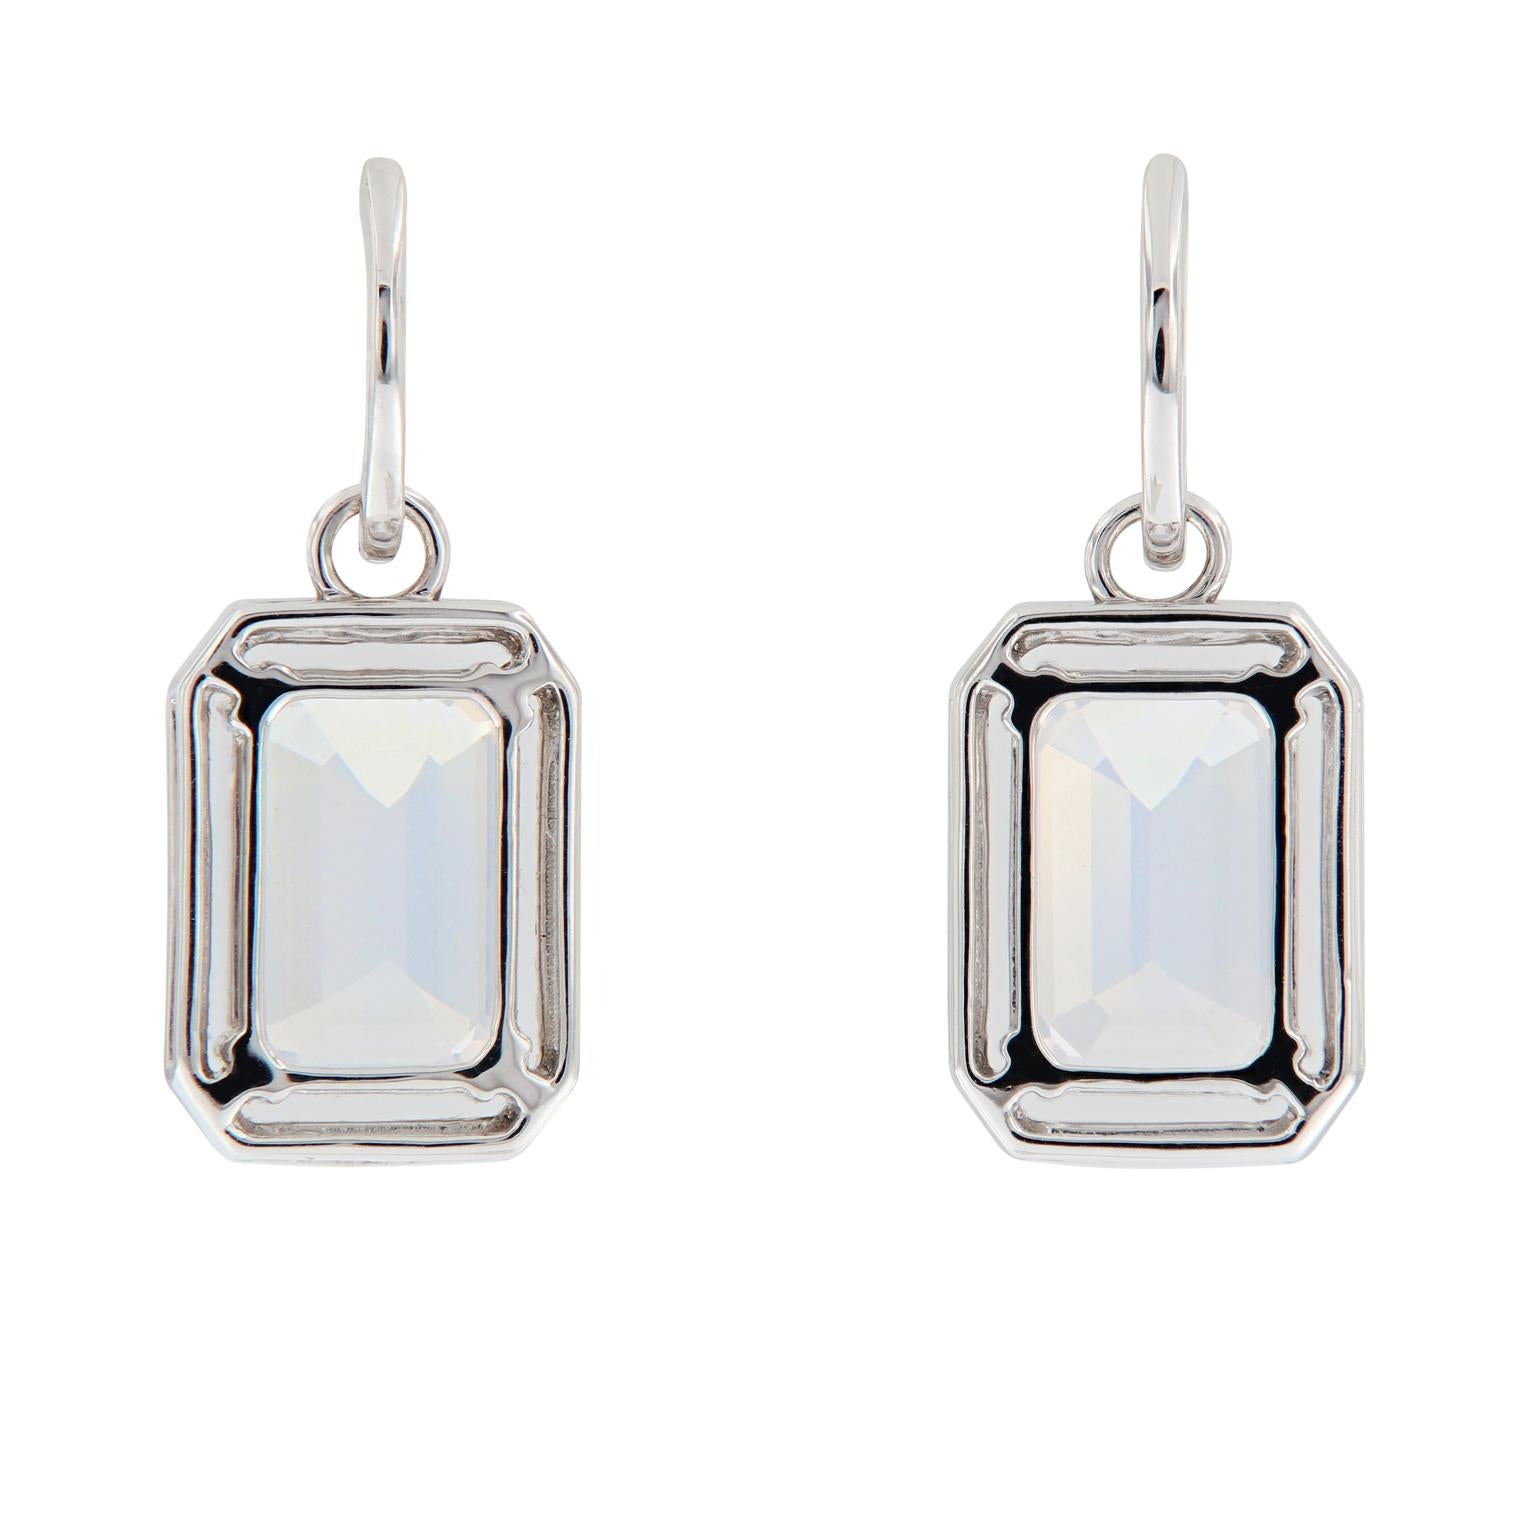 Earrings center around emerald cut moon quartz, accented with a halo of diamonds and crafted in 18k white gold. Earrings are from the Gossip Collection designed by Goshwara. Weigh 7.1 grams. 12mm x 27mm. Marked Goshwara.

Moon Quartz 7.31